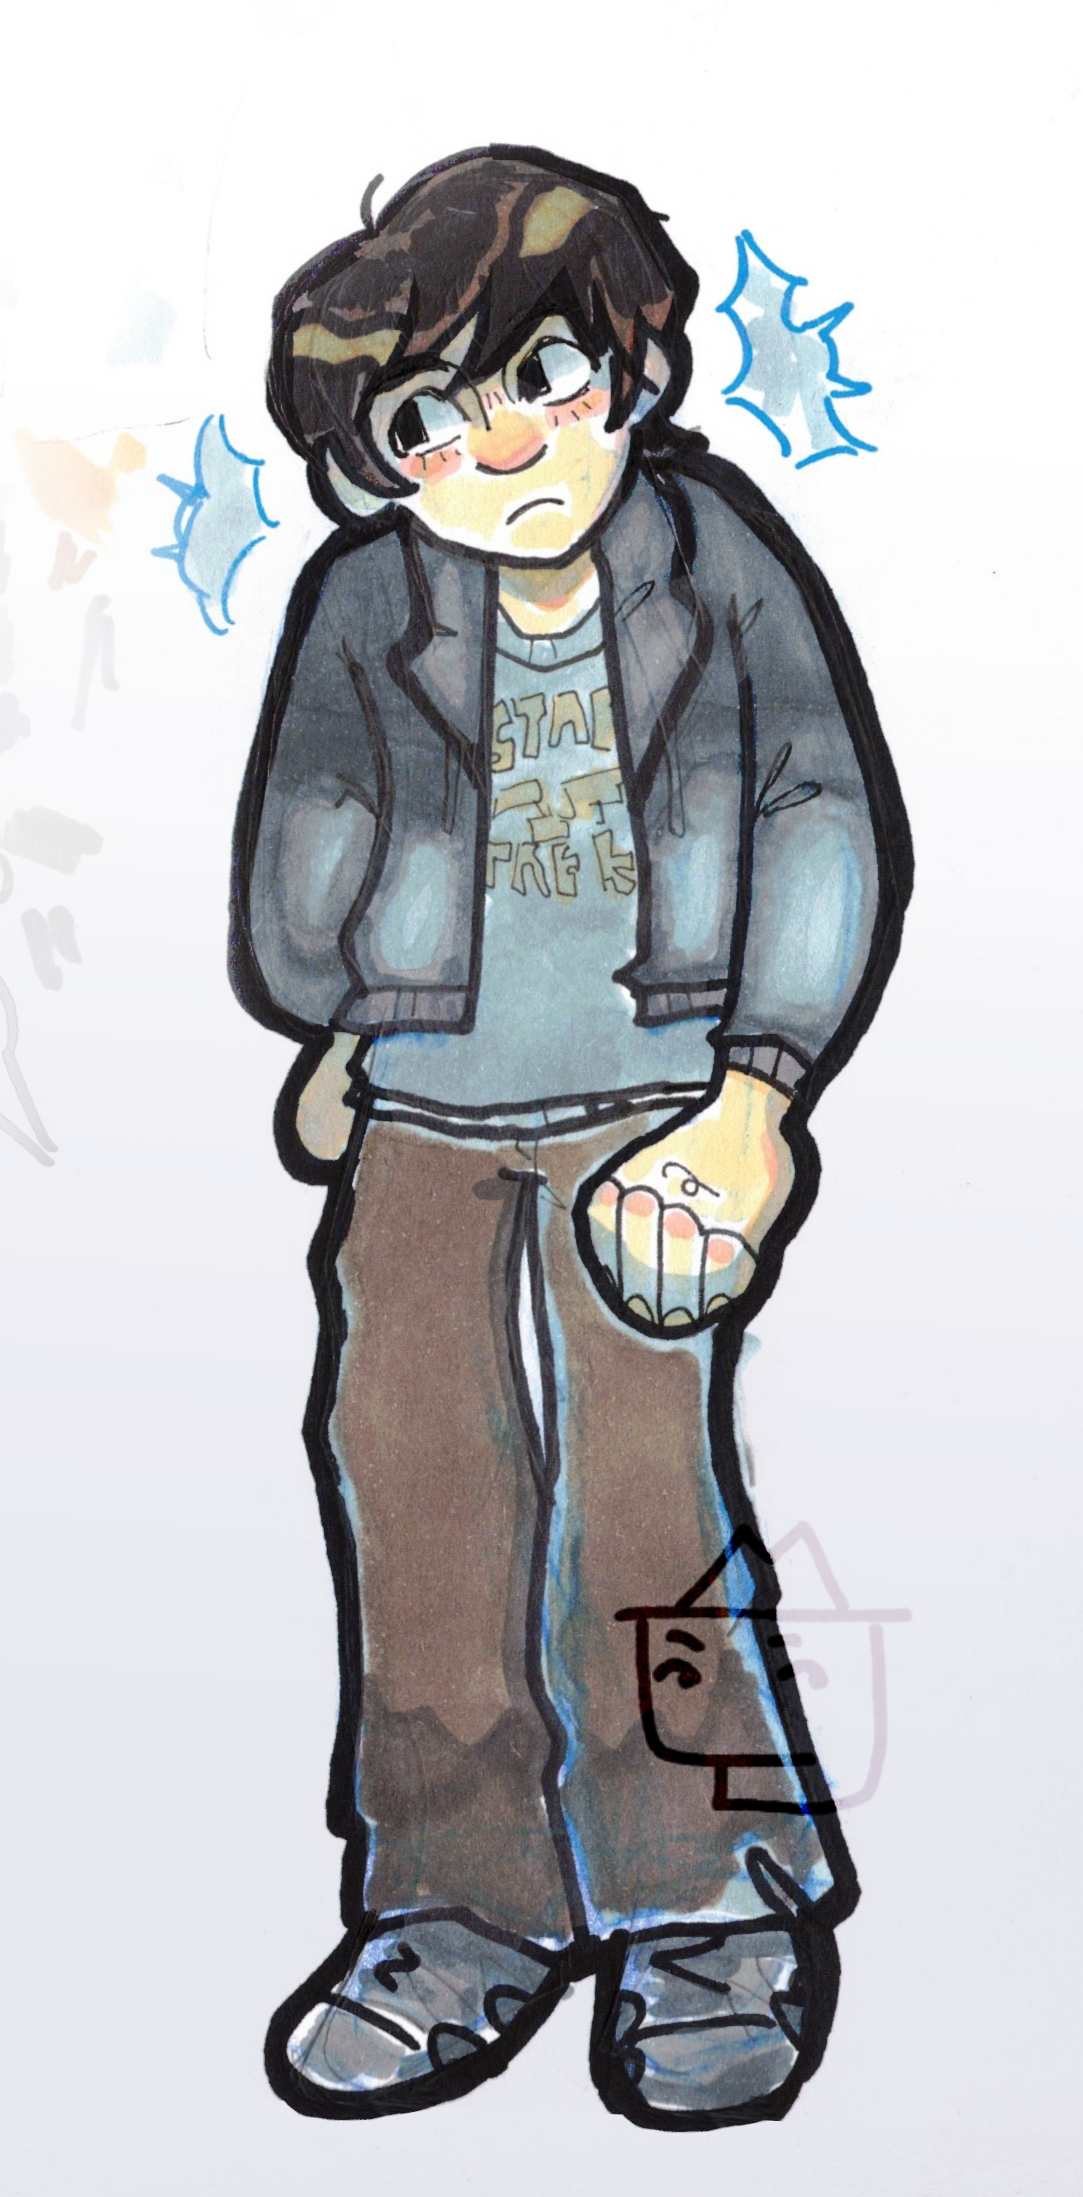 A drawing of Ethan from the TV show My Babysitter's a Vampire. He is a slouching teenager with middle-length brown hair. He wears a grey hoodie, with a blue star trek shirt underneath. He wears baggy brown pants and grey sneakers.